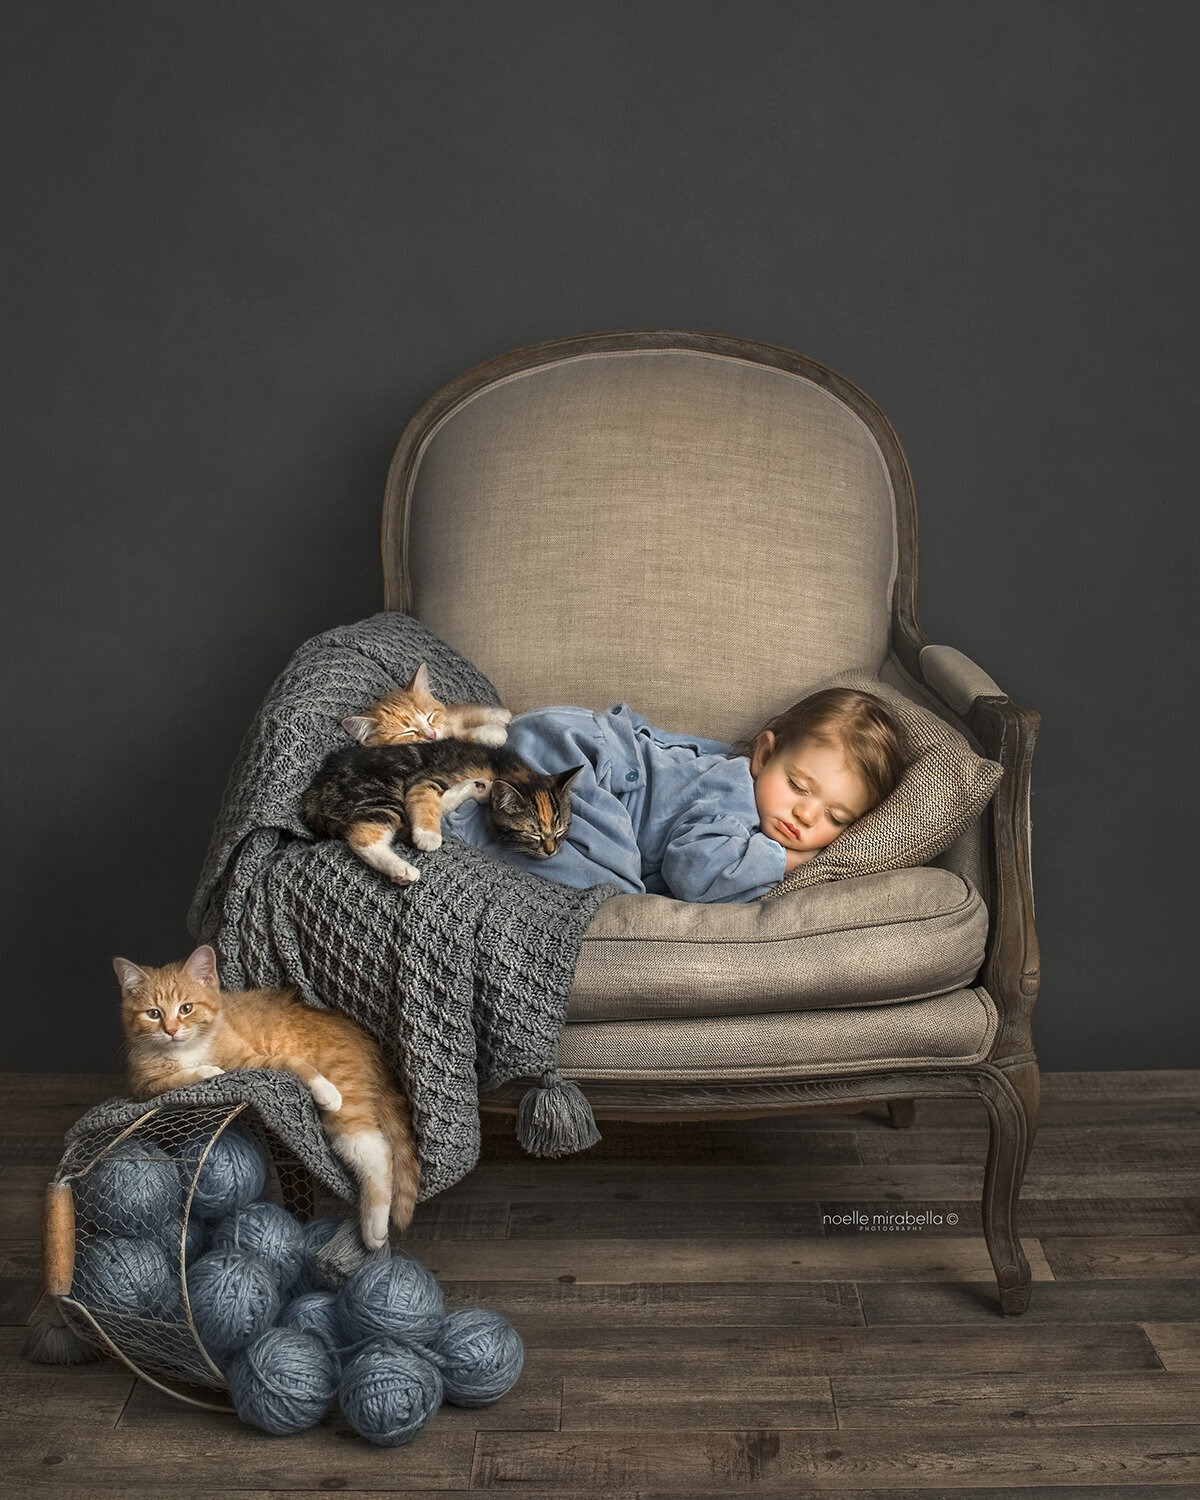 Baby dressed in blue romper sleeping in vintage french chair with three little kittens.